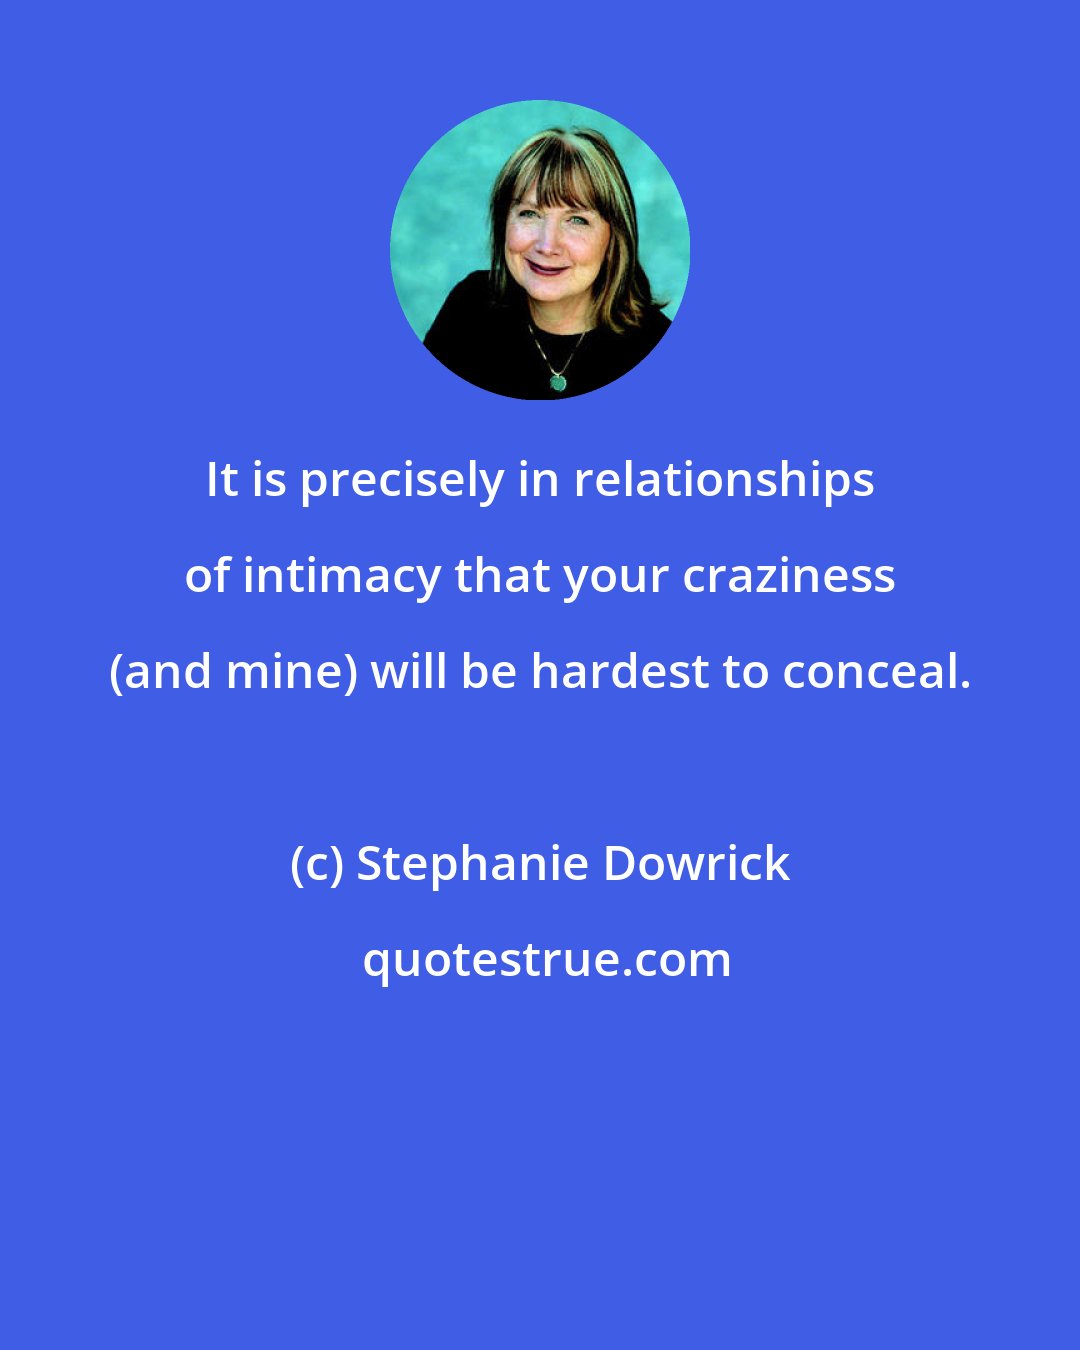 Stephanie Dowrick: It is precisely in relationships of intimacy that your craziness (and mine) will be hardest to conceal.